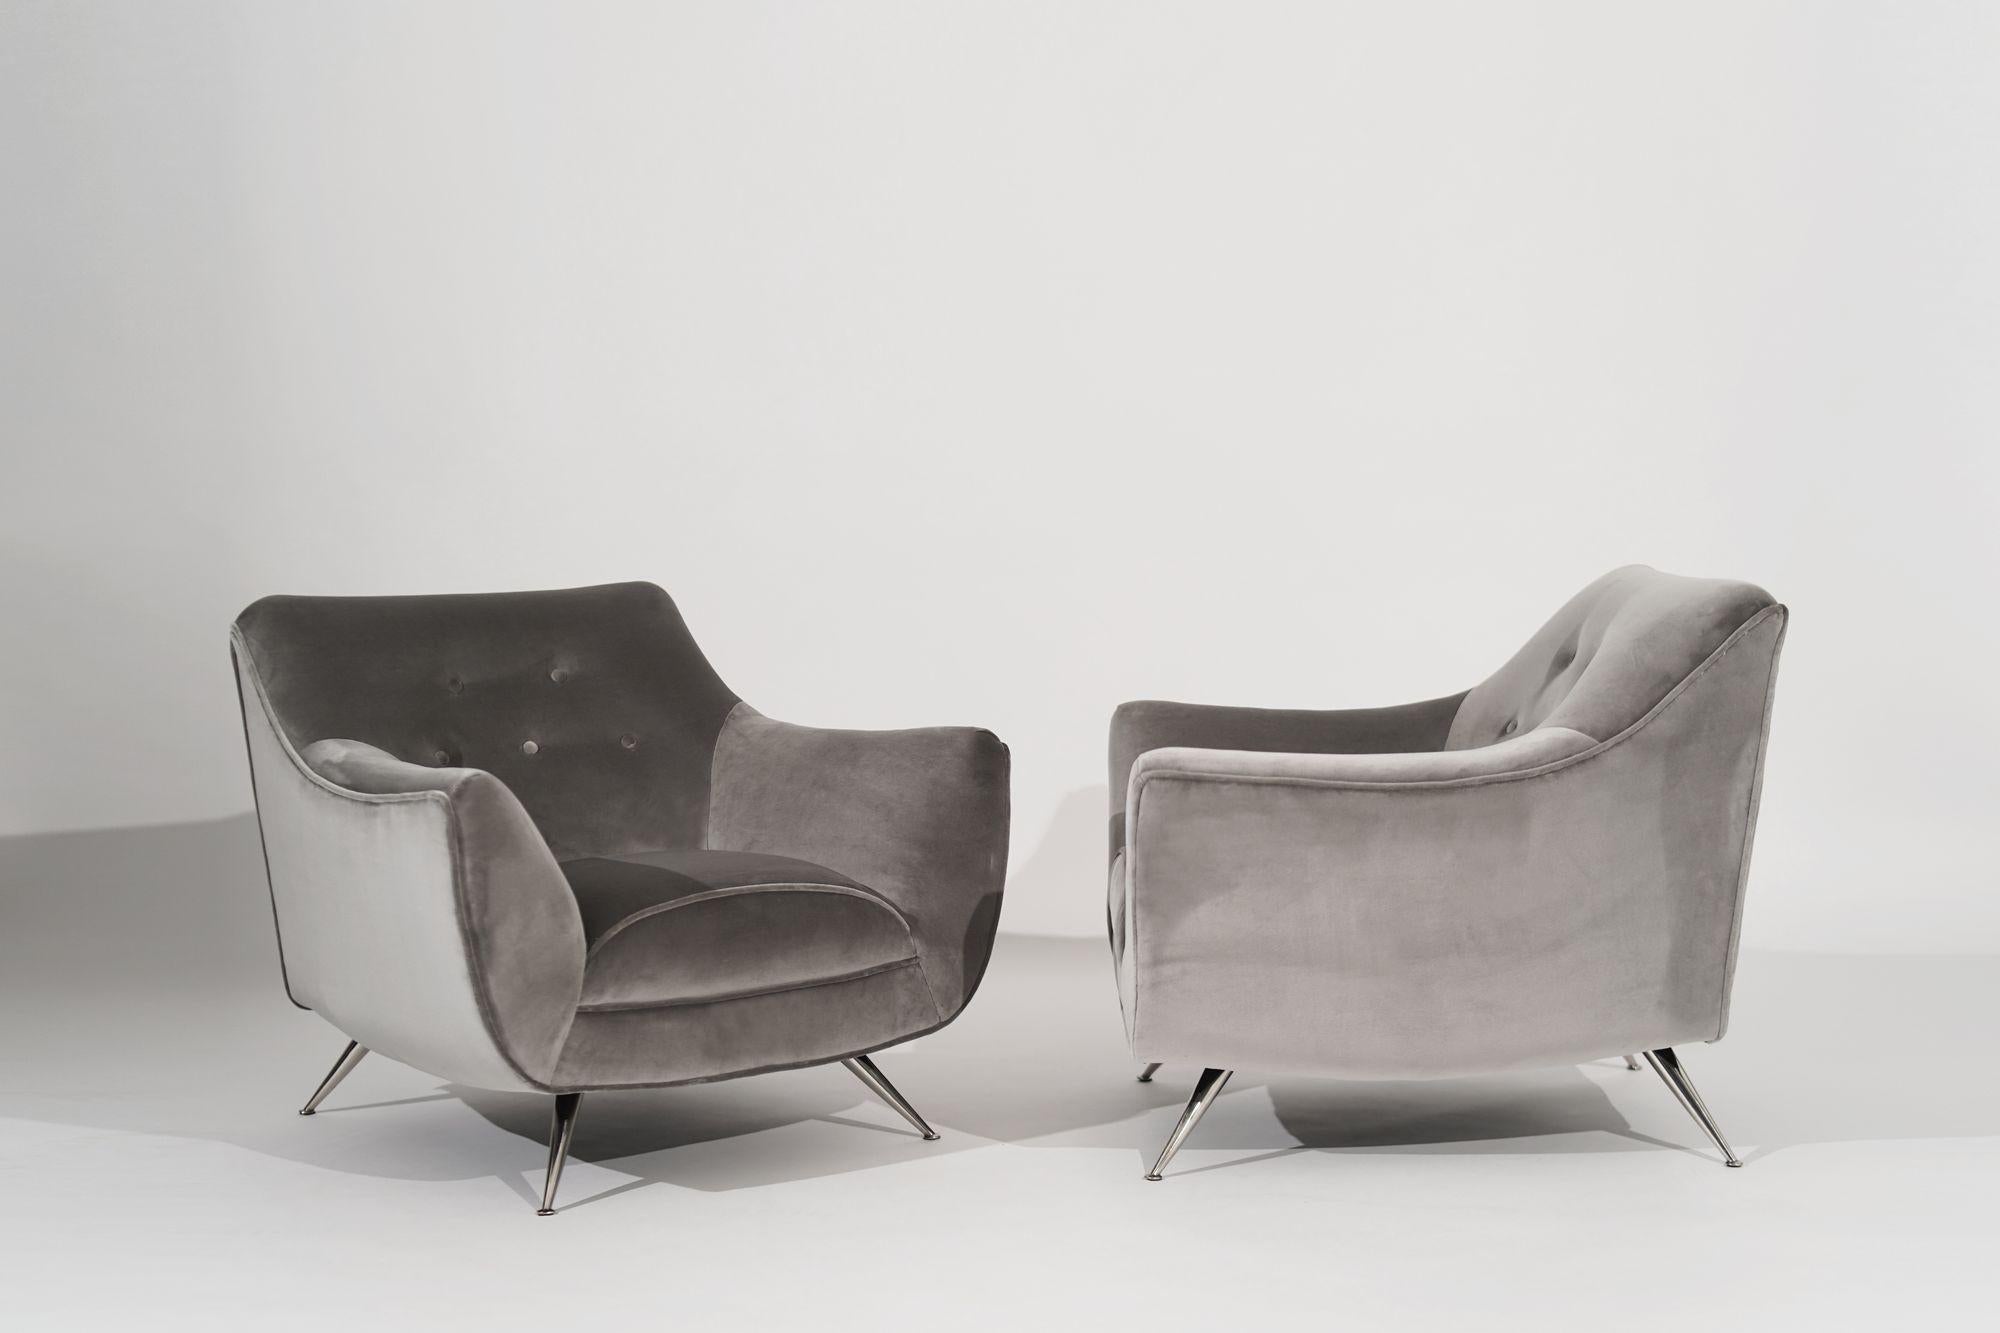 American Set of Lounge Chairs by Henry Glass in Grey Alpaca Velvet, C. 1950s For Sale